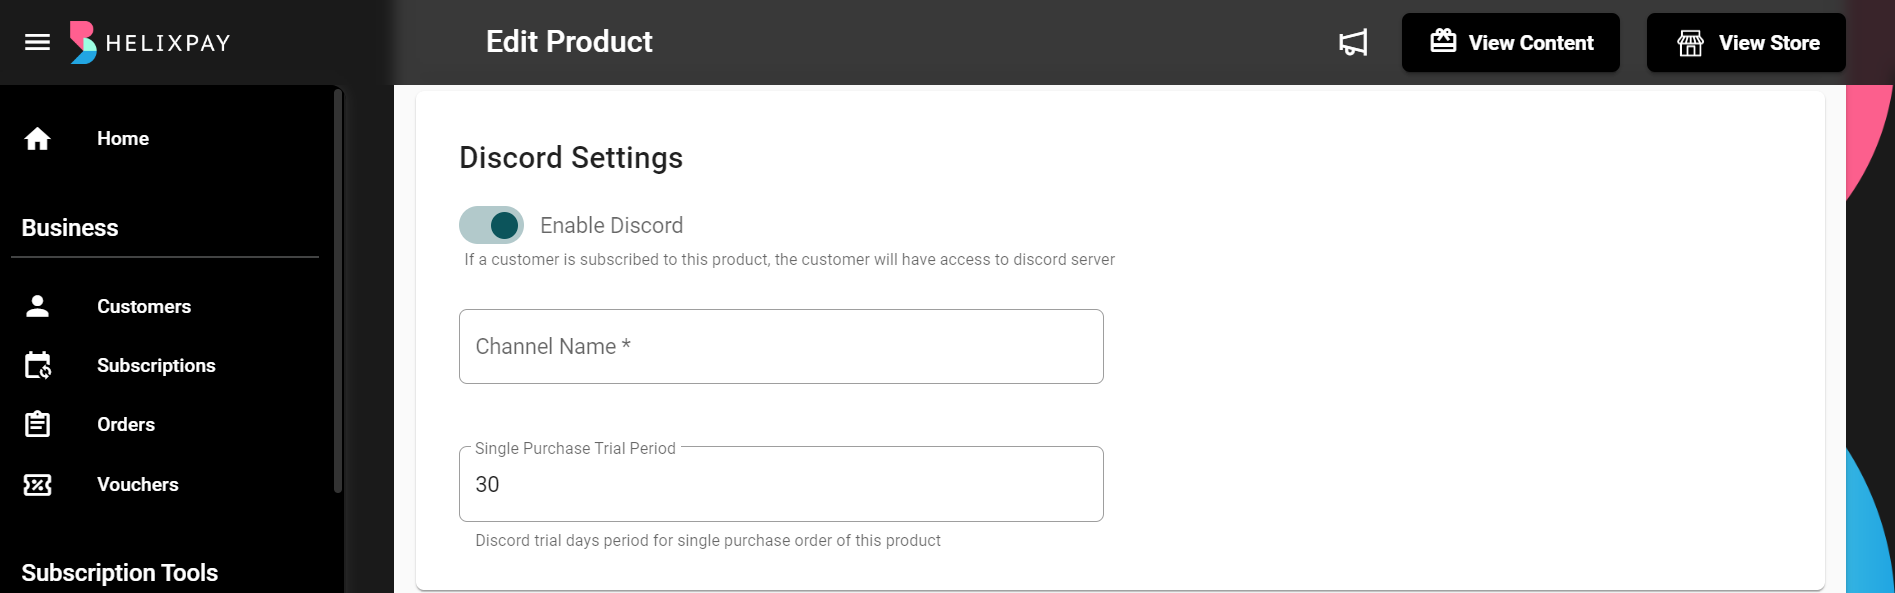 Set the number of days the customers can access Discord if they only purchase single order.